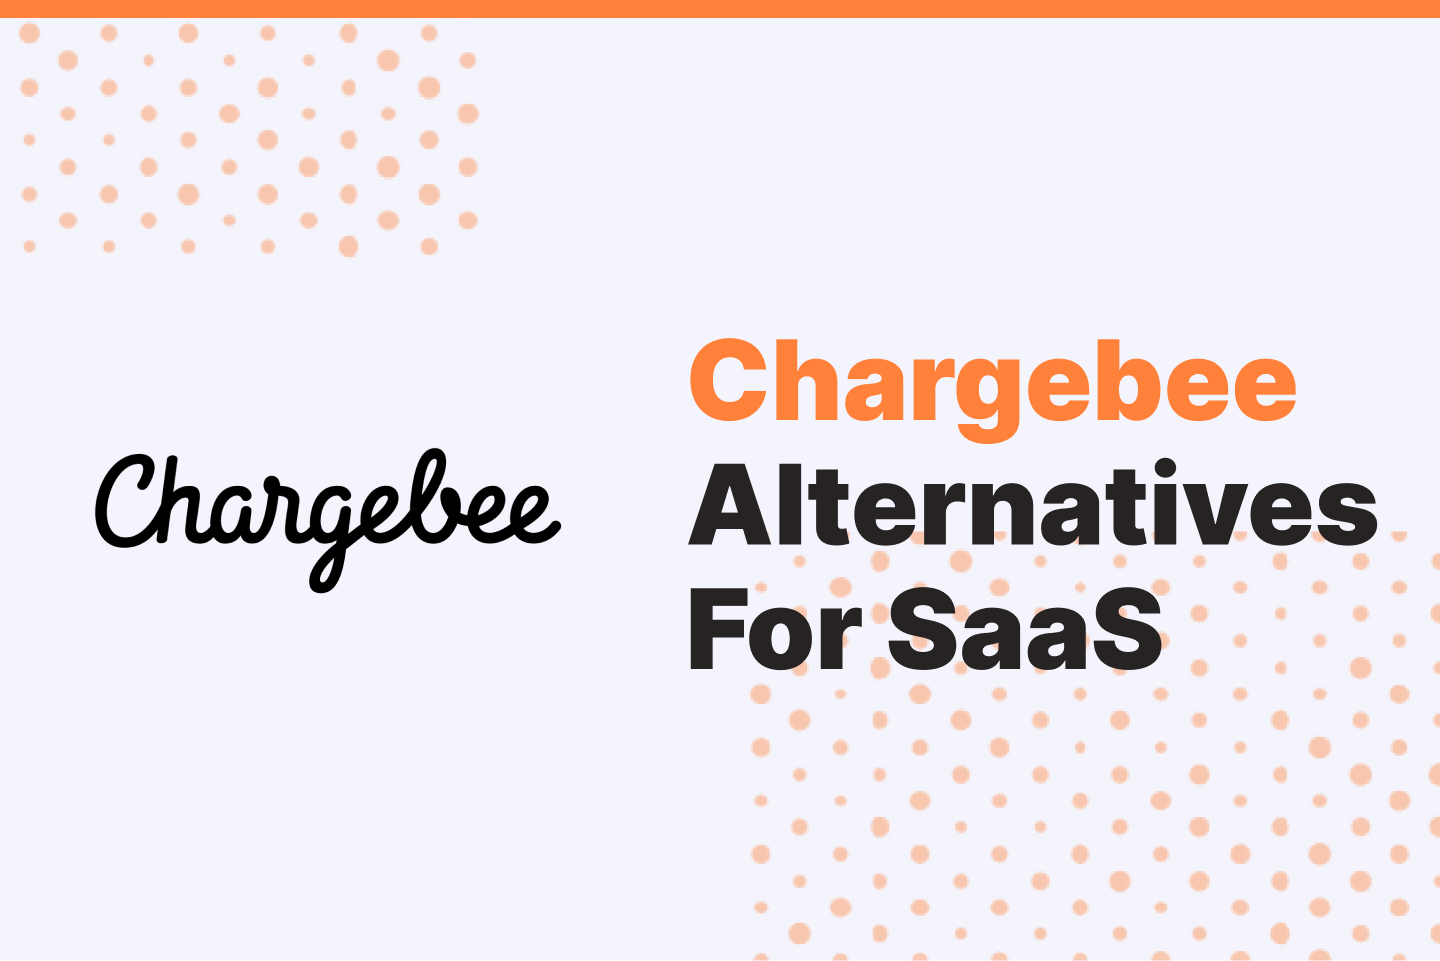 7 Chargebee Alternatives That Might Be A Better Choice